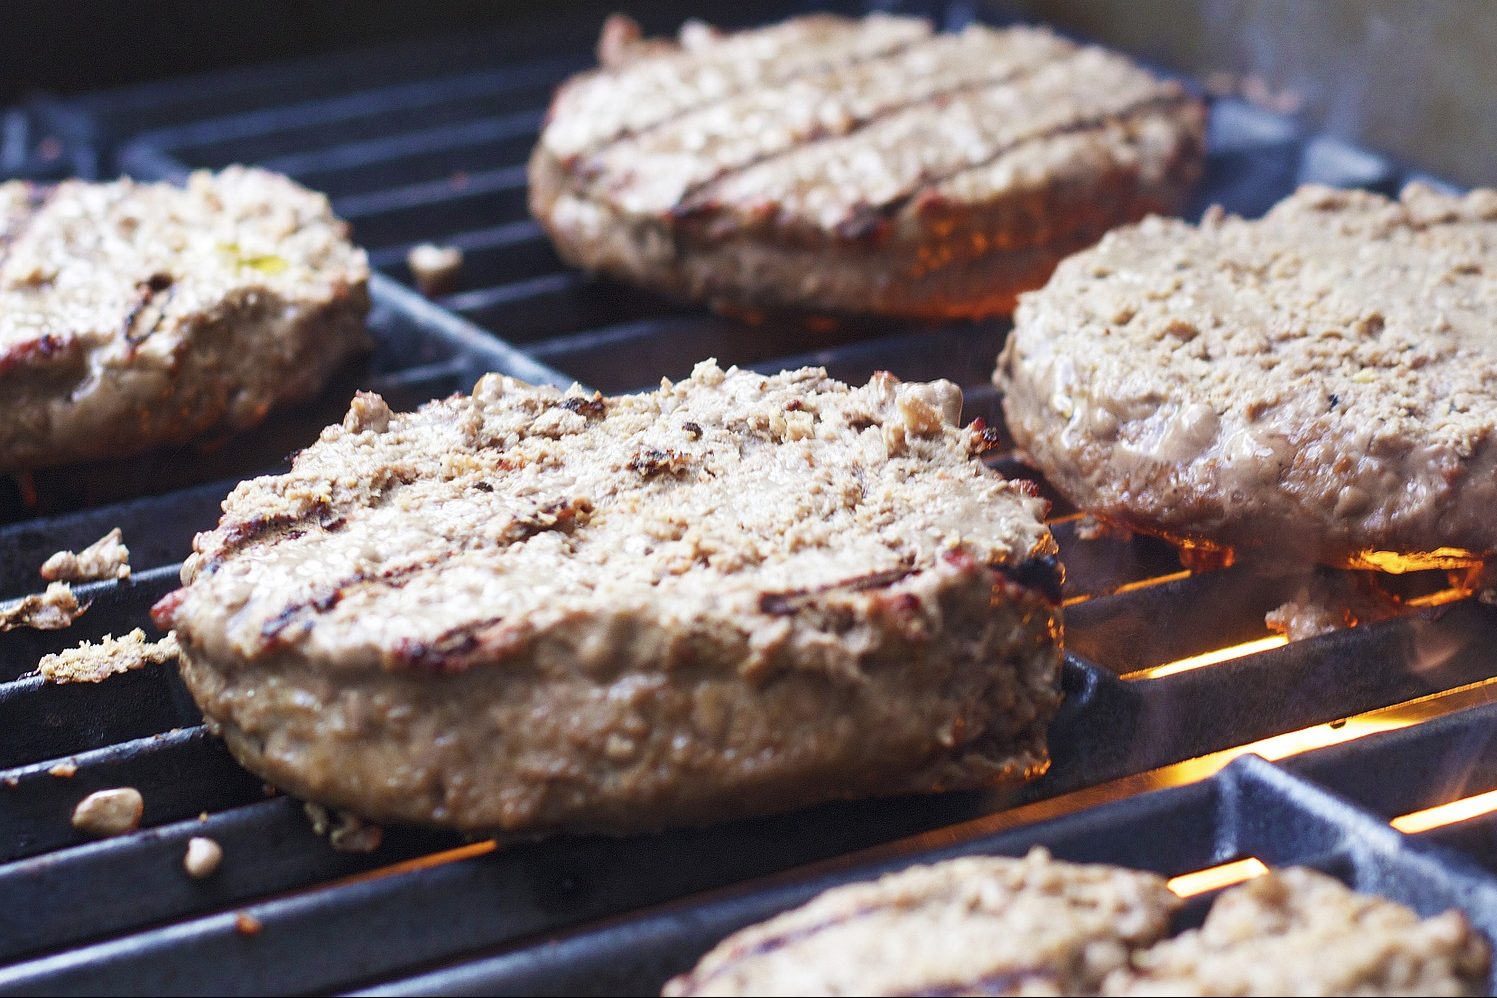 Burgers on a grill. (Tesa Robbins from Pixabay)